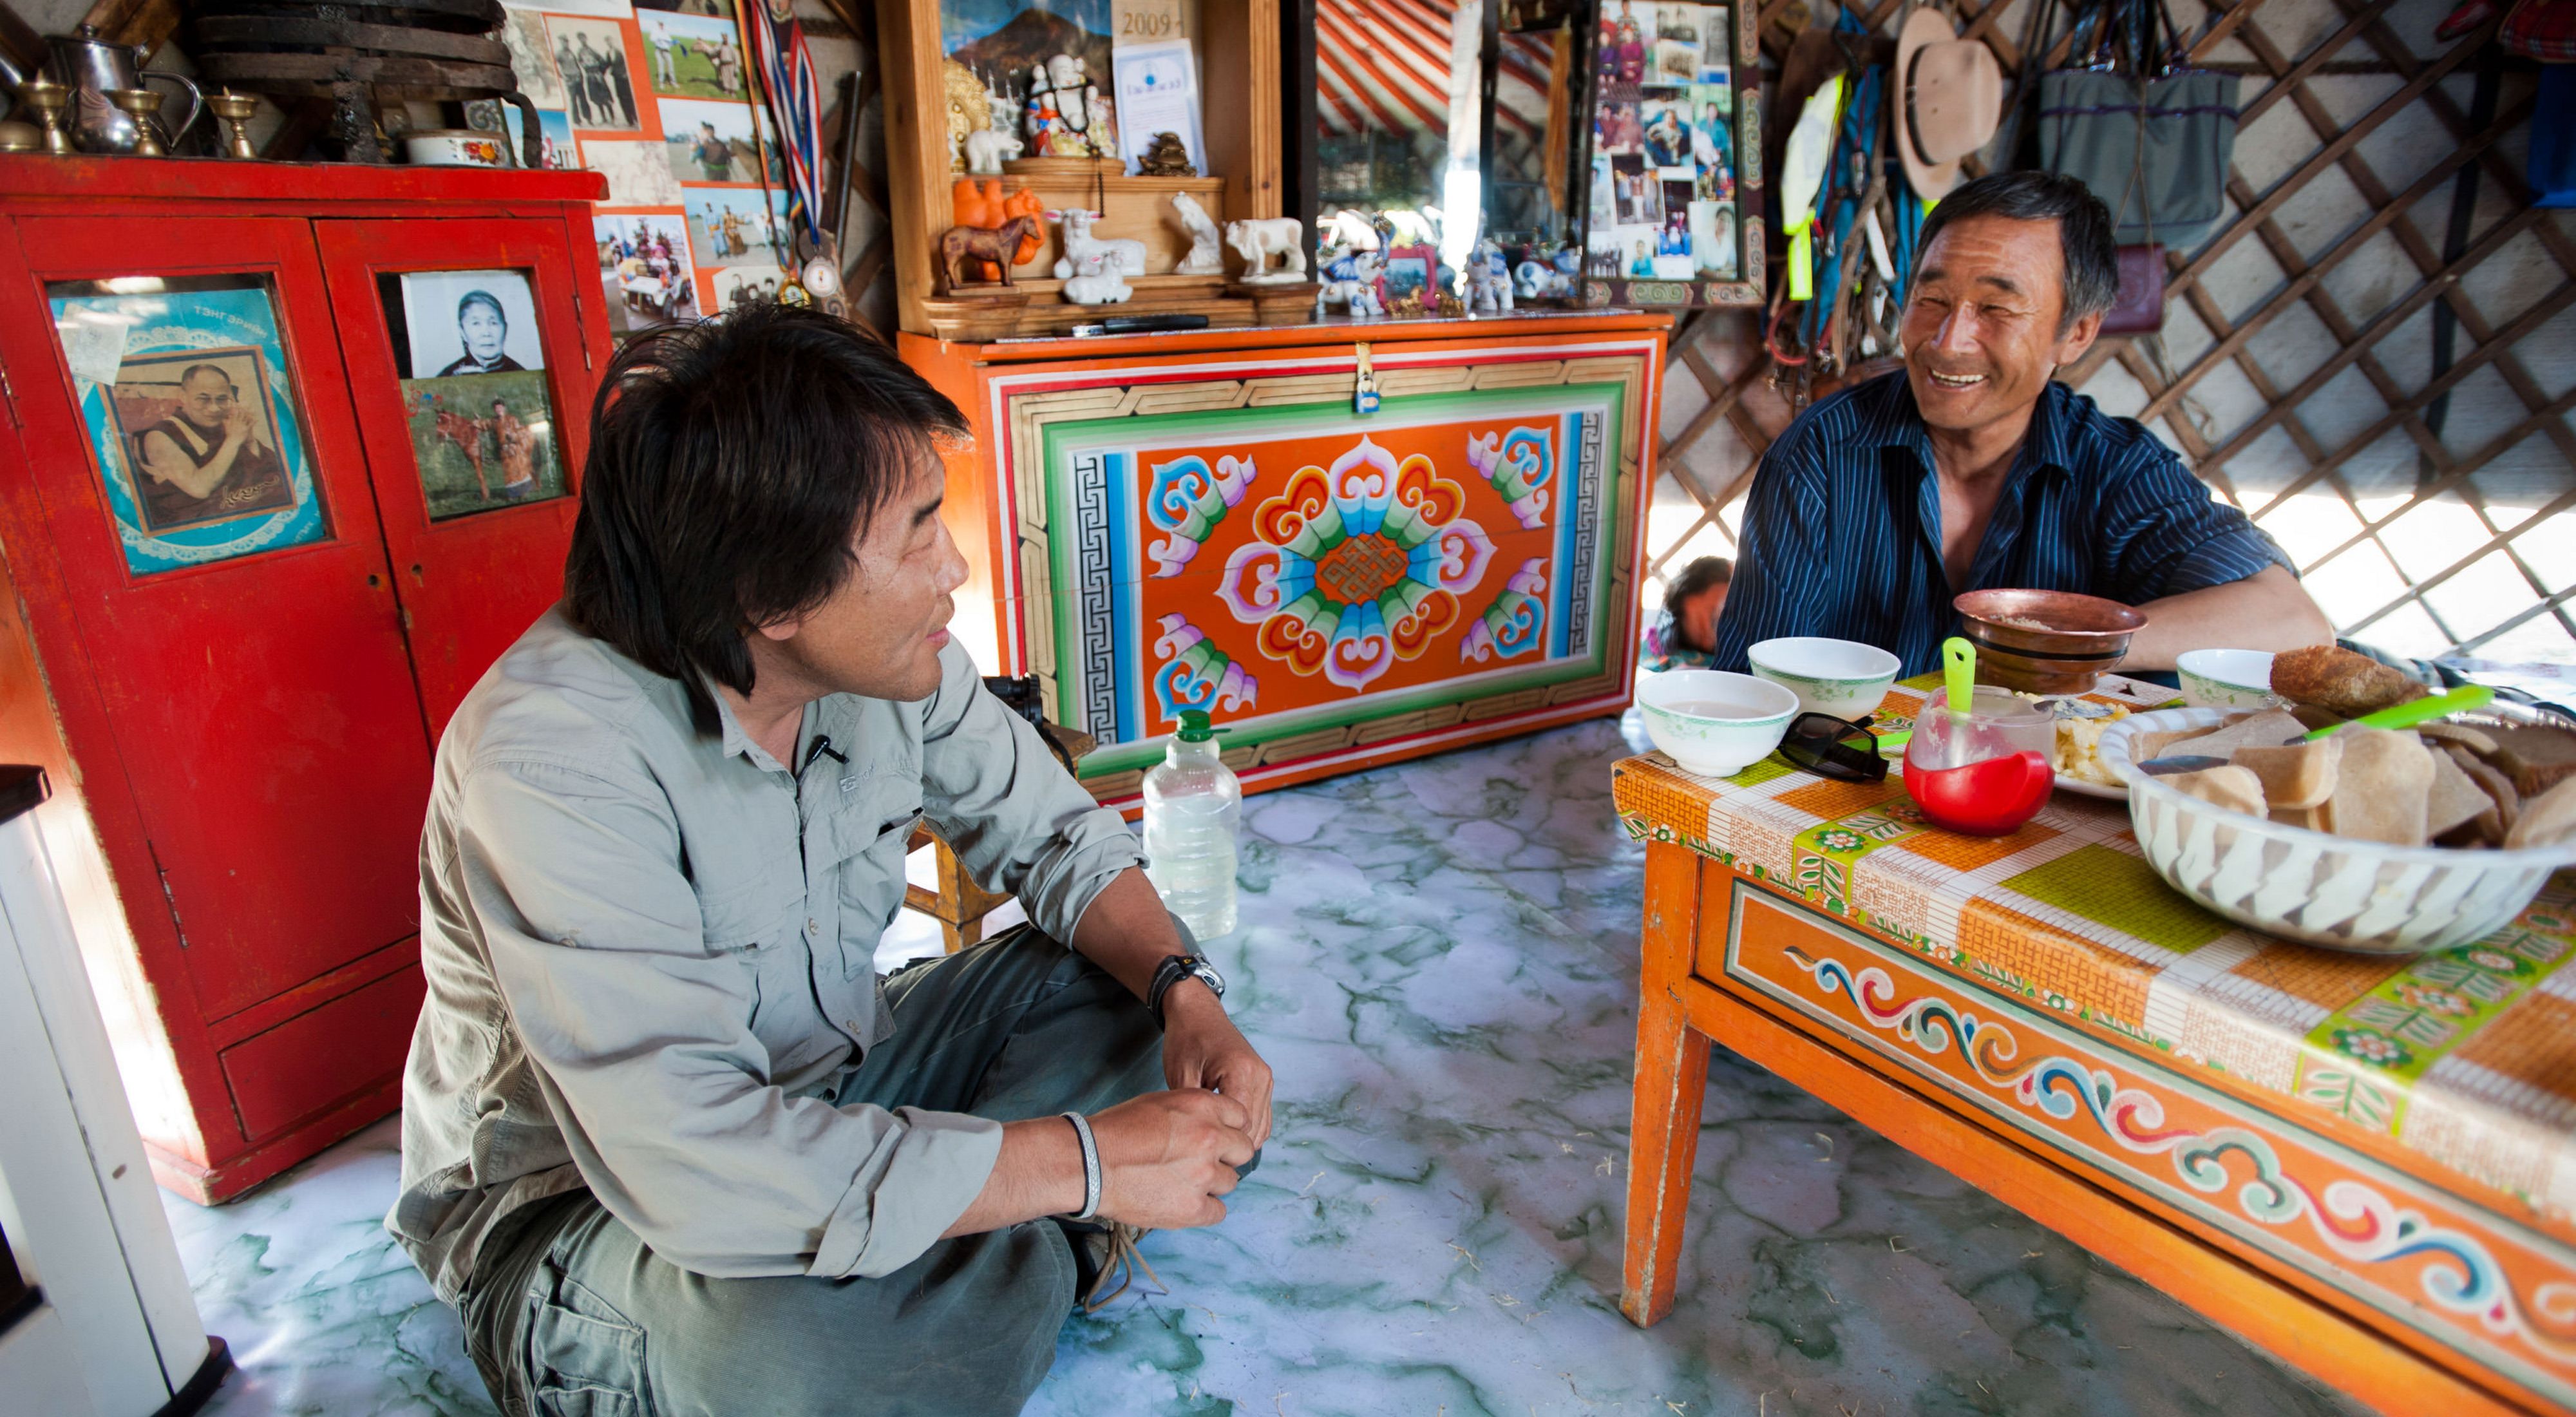 Gala Davaa, TNC Country Director of Mongolia, sits with a Mongolia header over a meal.